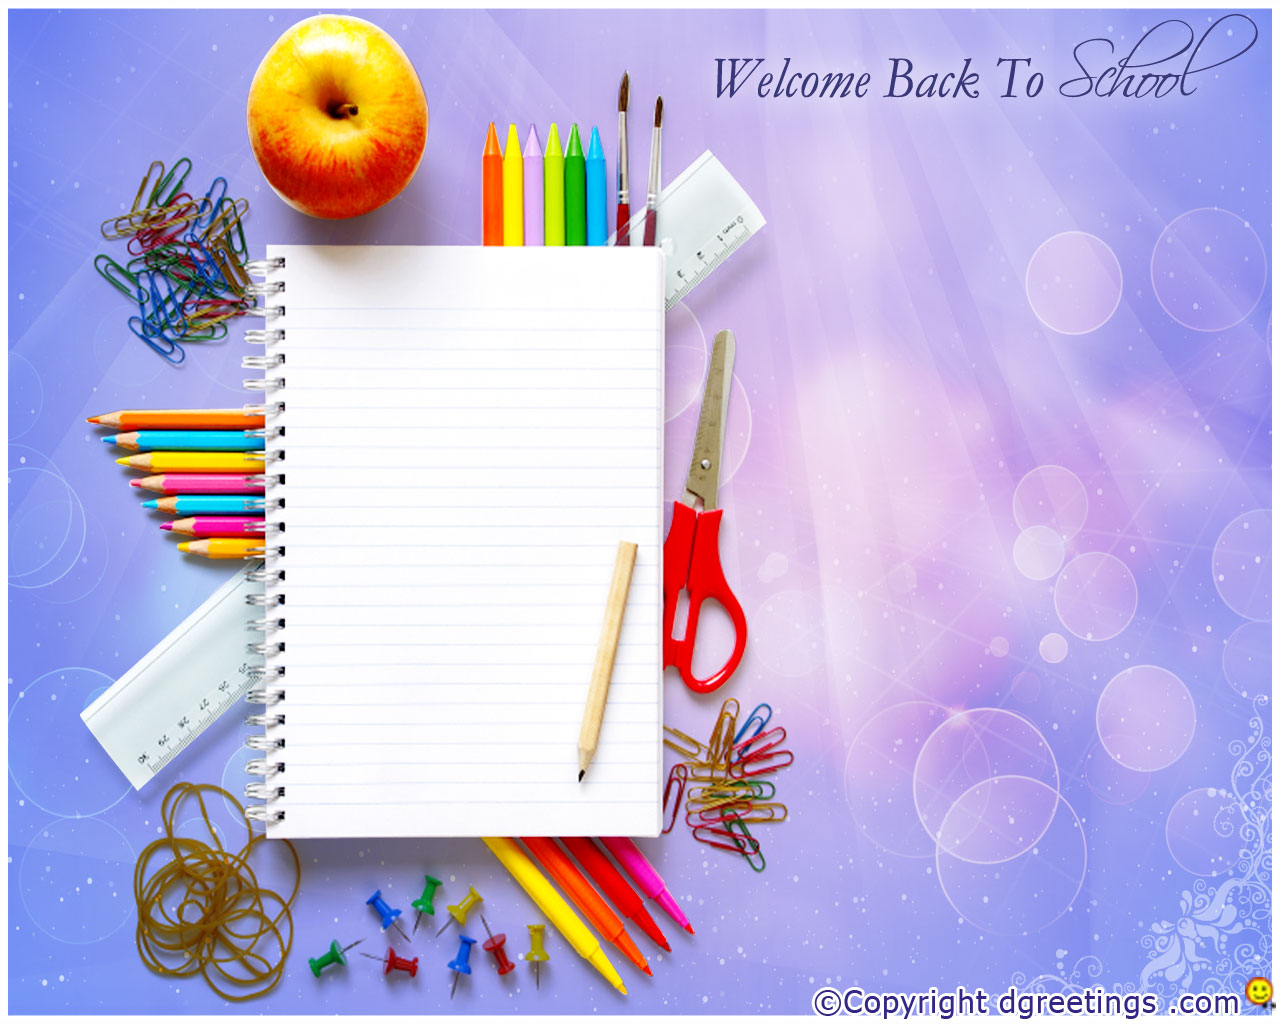 Back to School wallpapers Back to School Wallpapers Wallpapers 1280x1024